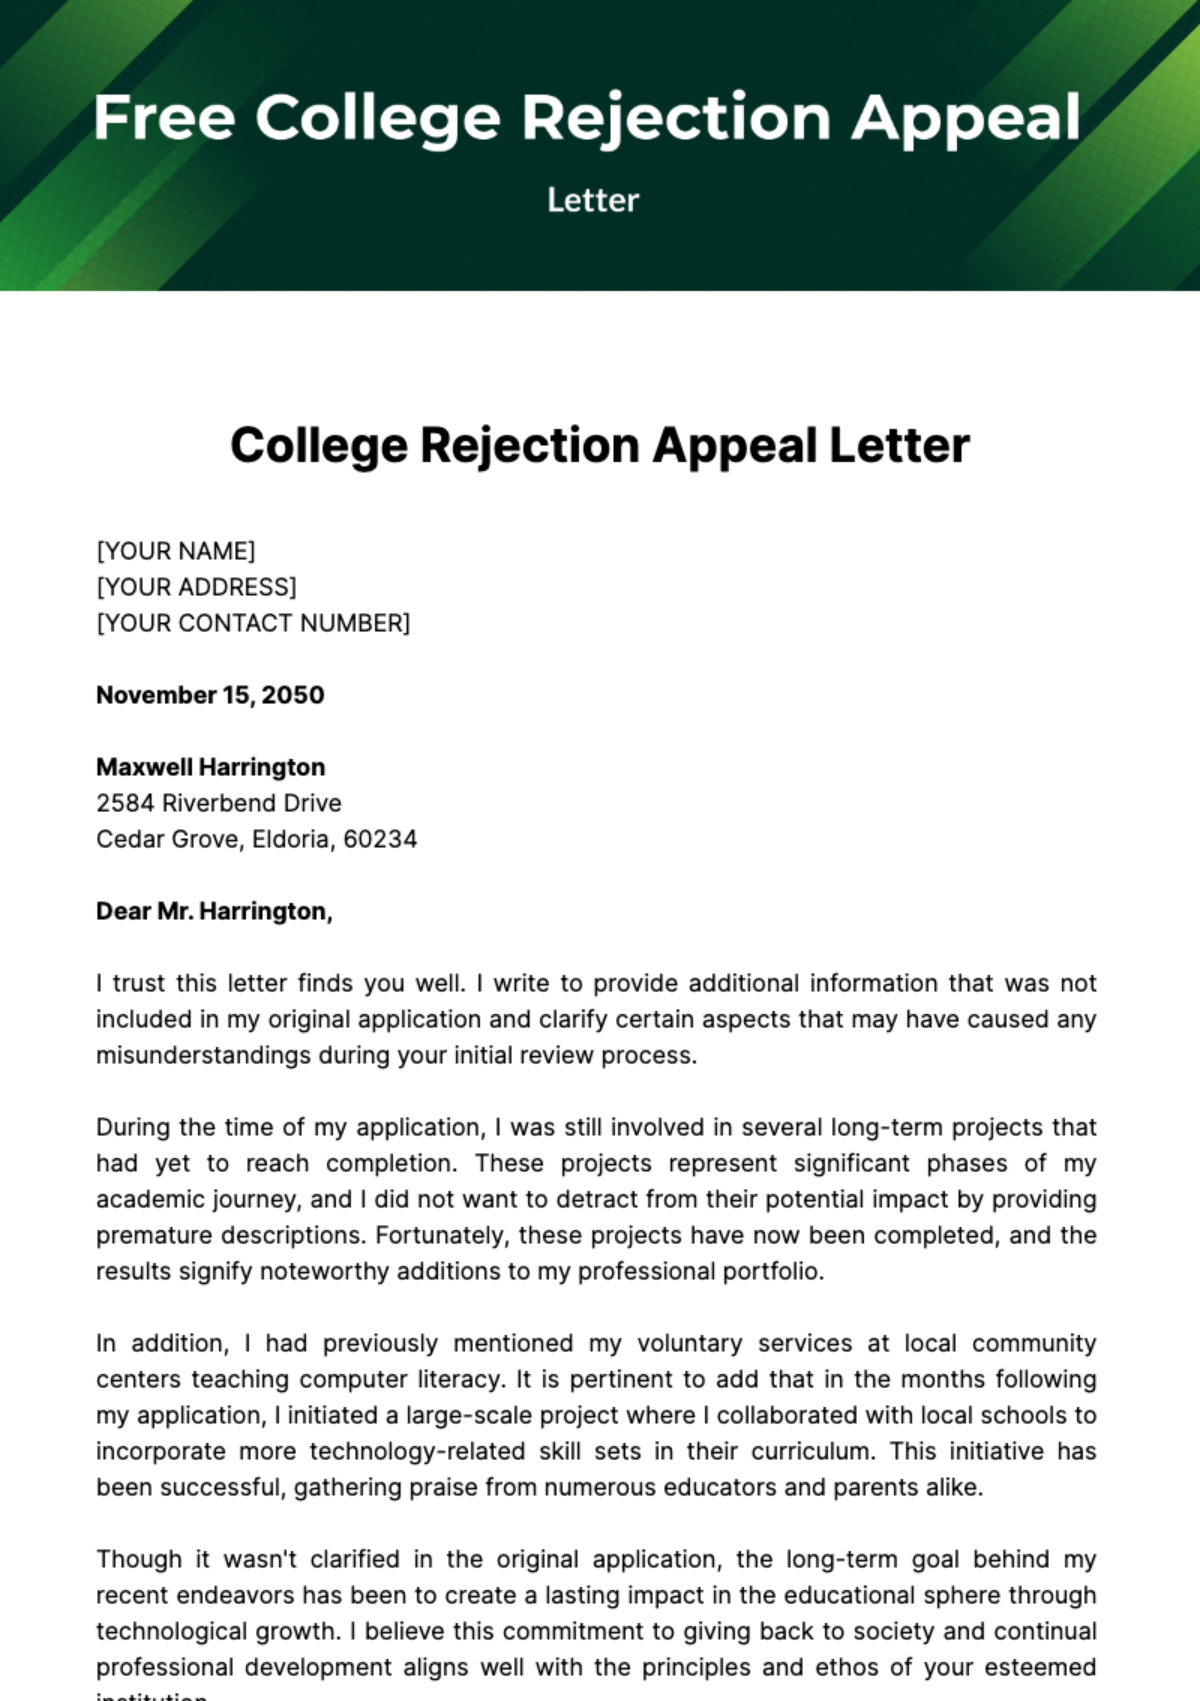 Free College Rejection Appeal Letter Template